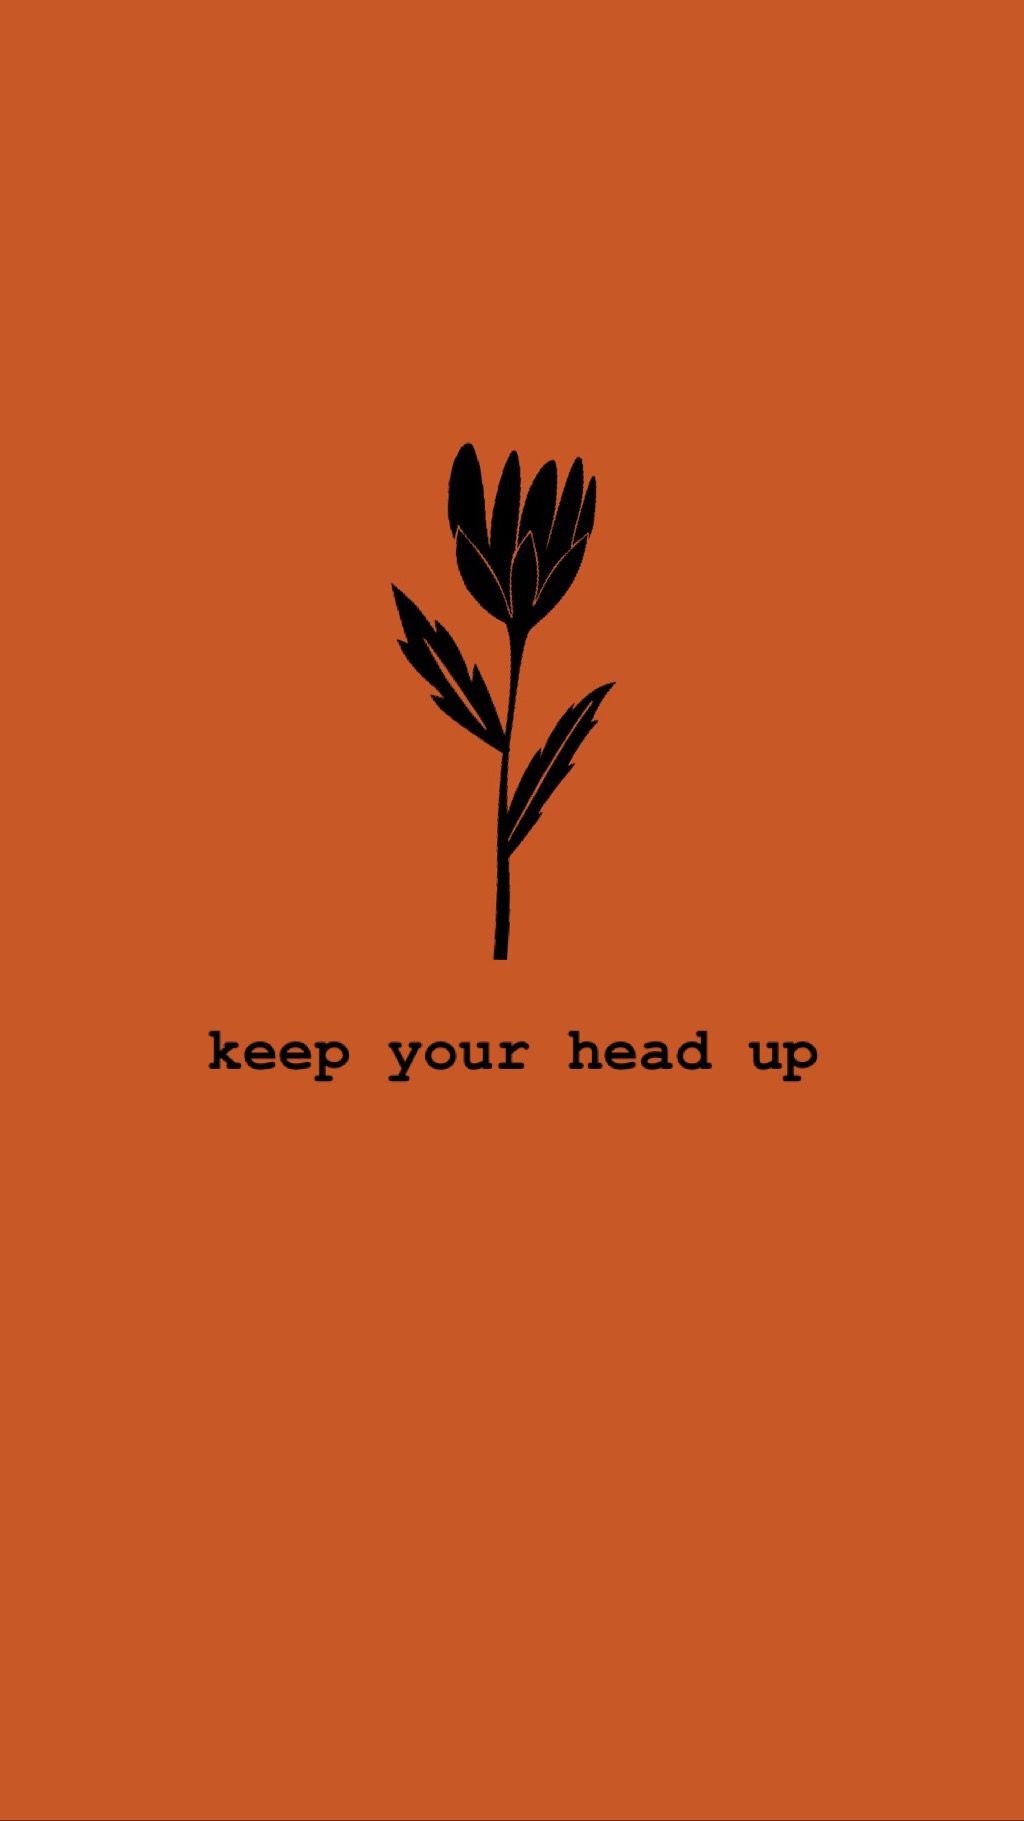 Keep Your Head Up. Positive Quotes Happiness. Orange aesthetic, Orange quotes, Happy quotes positive